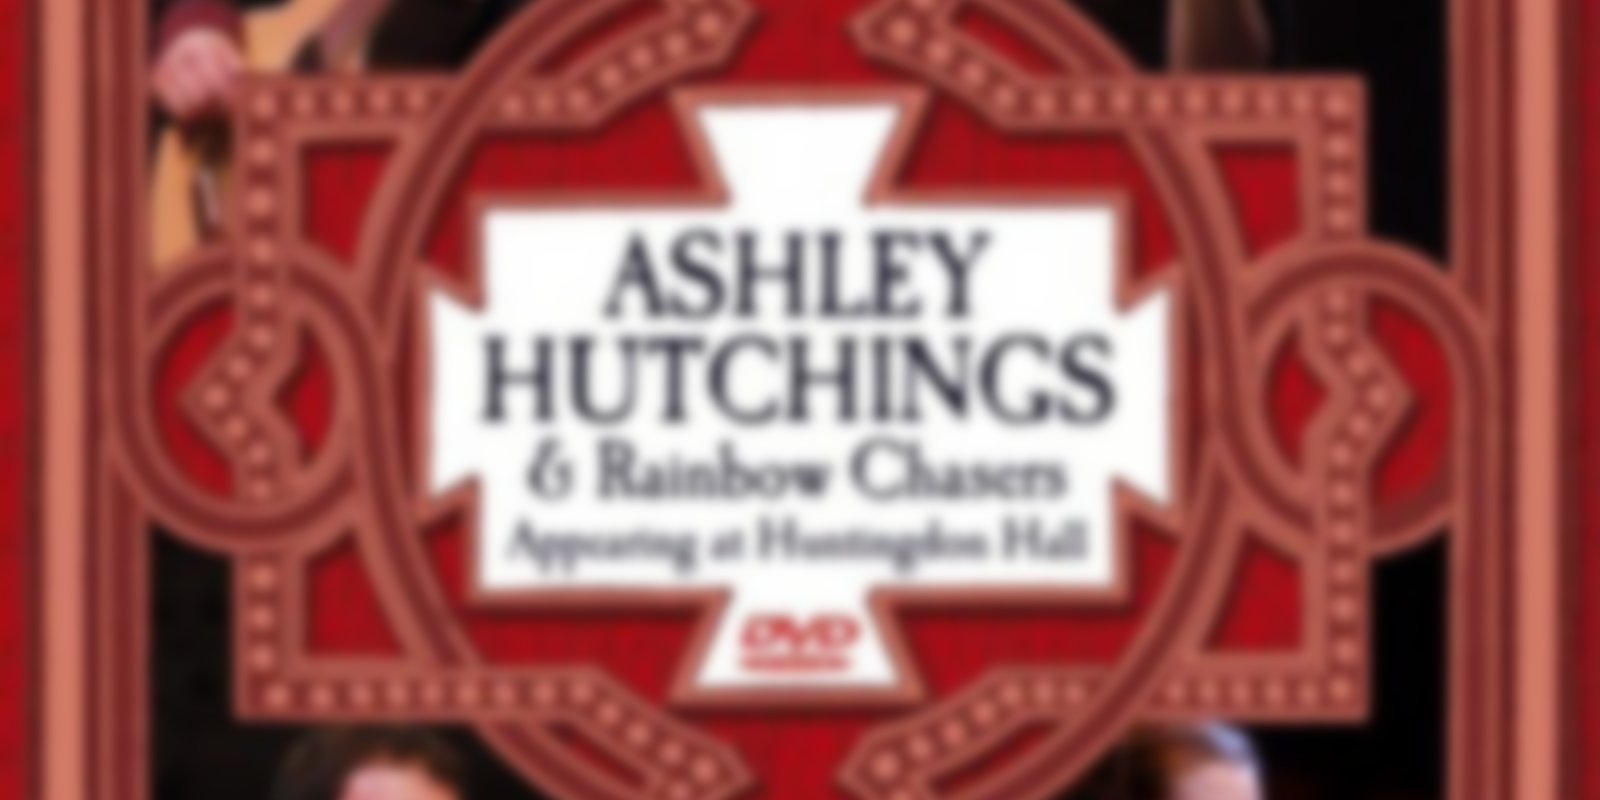 Ashley Hutchings & Rainbow Chasers